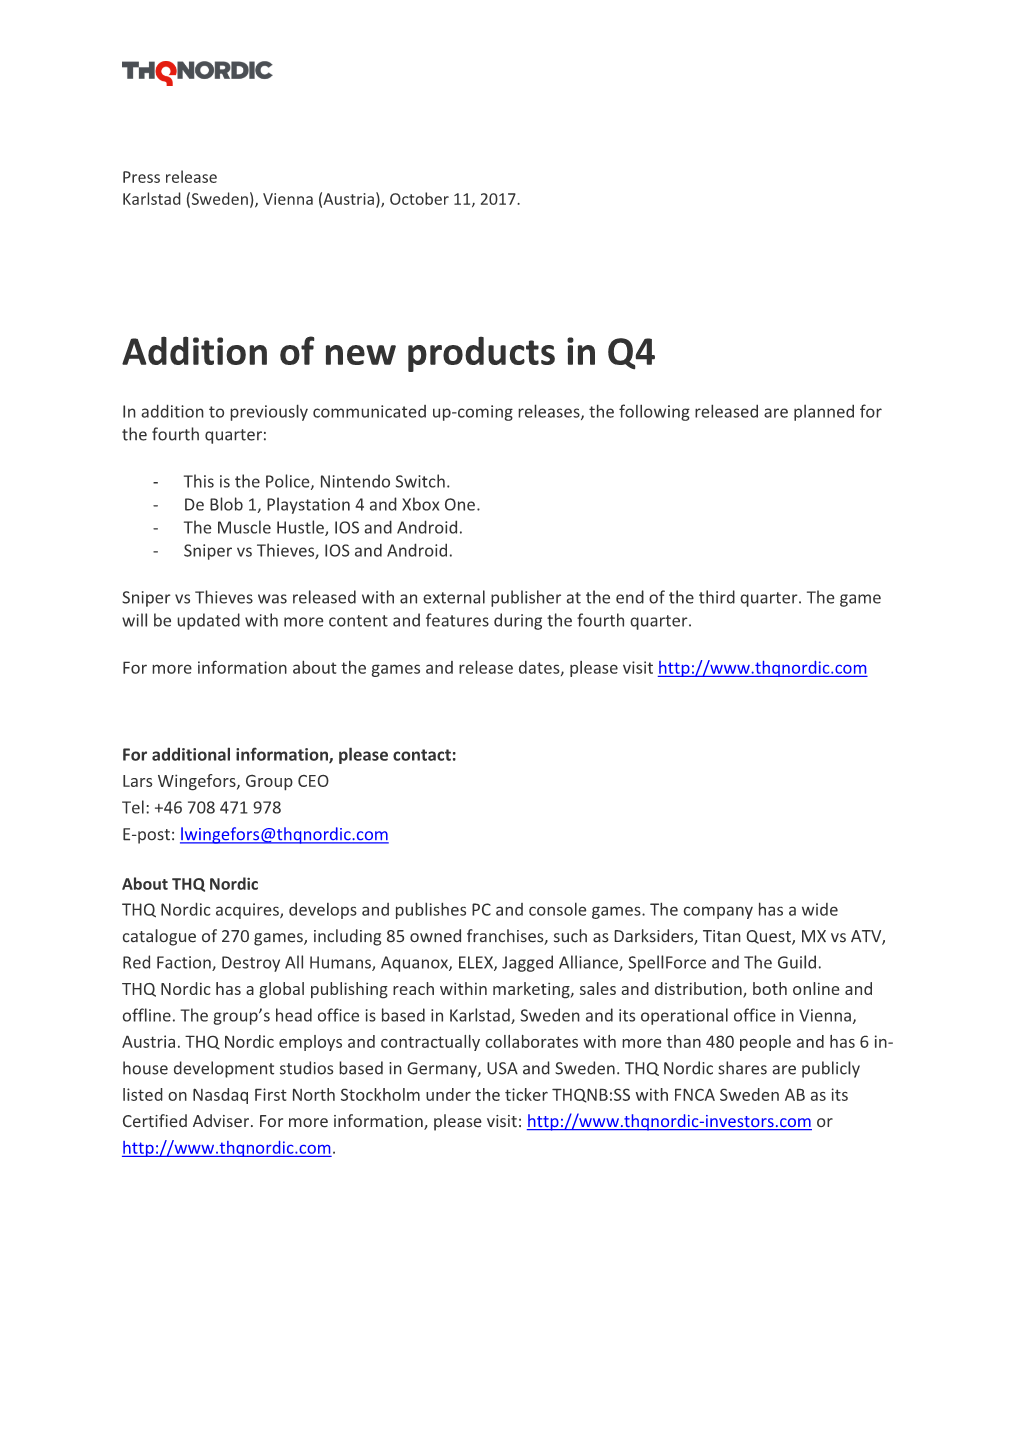 Addition of New Products in Q4